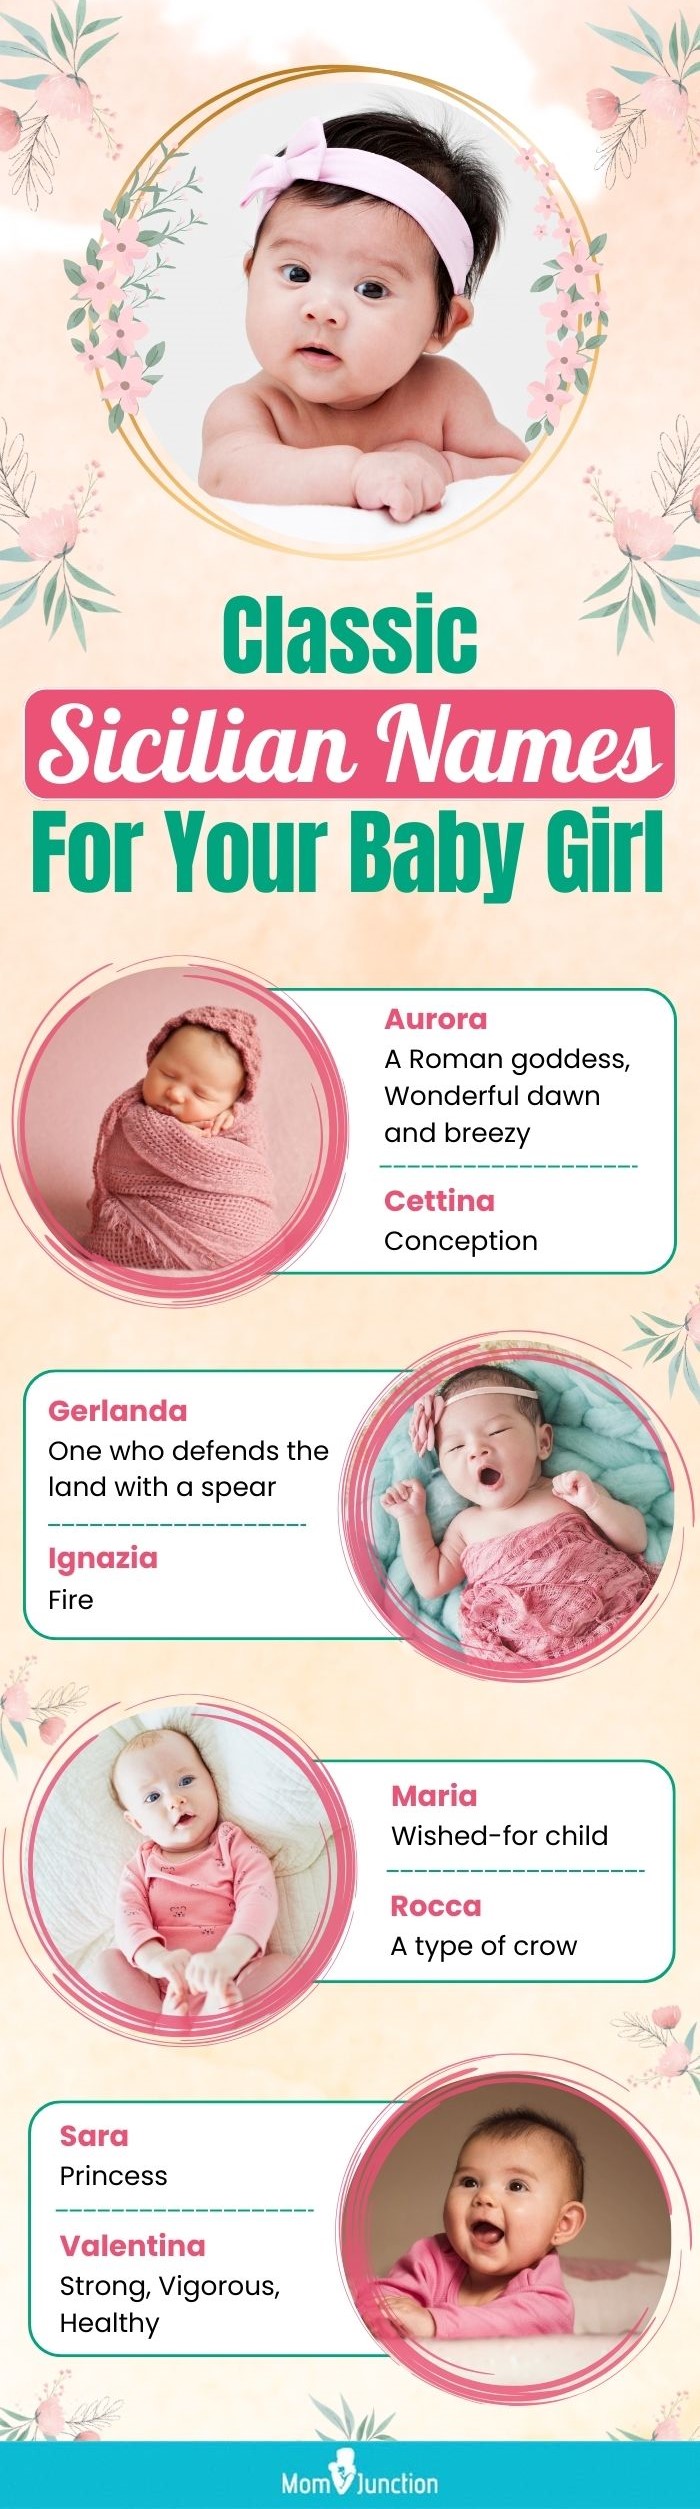 classic sicilian names for your baby girl (infographic)